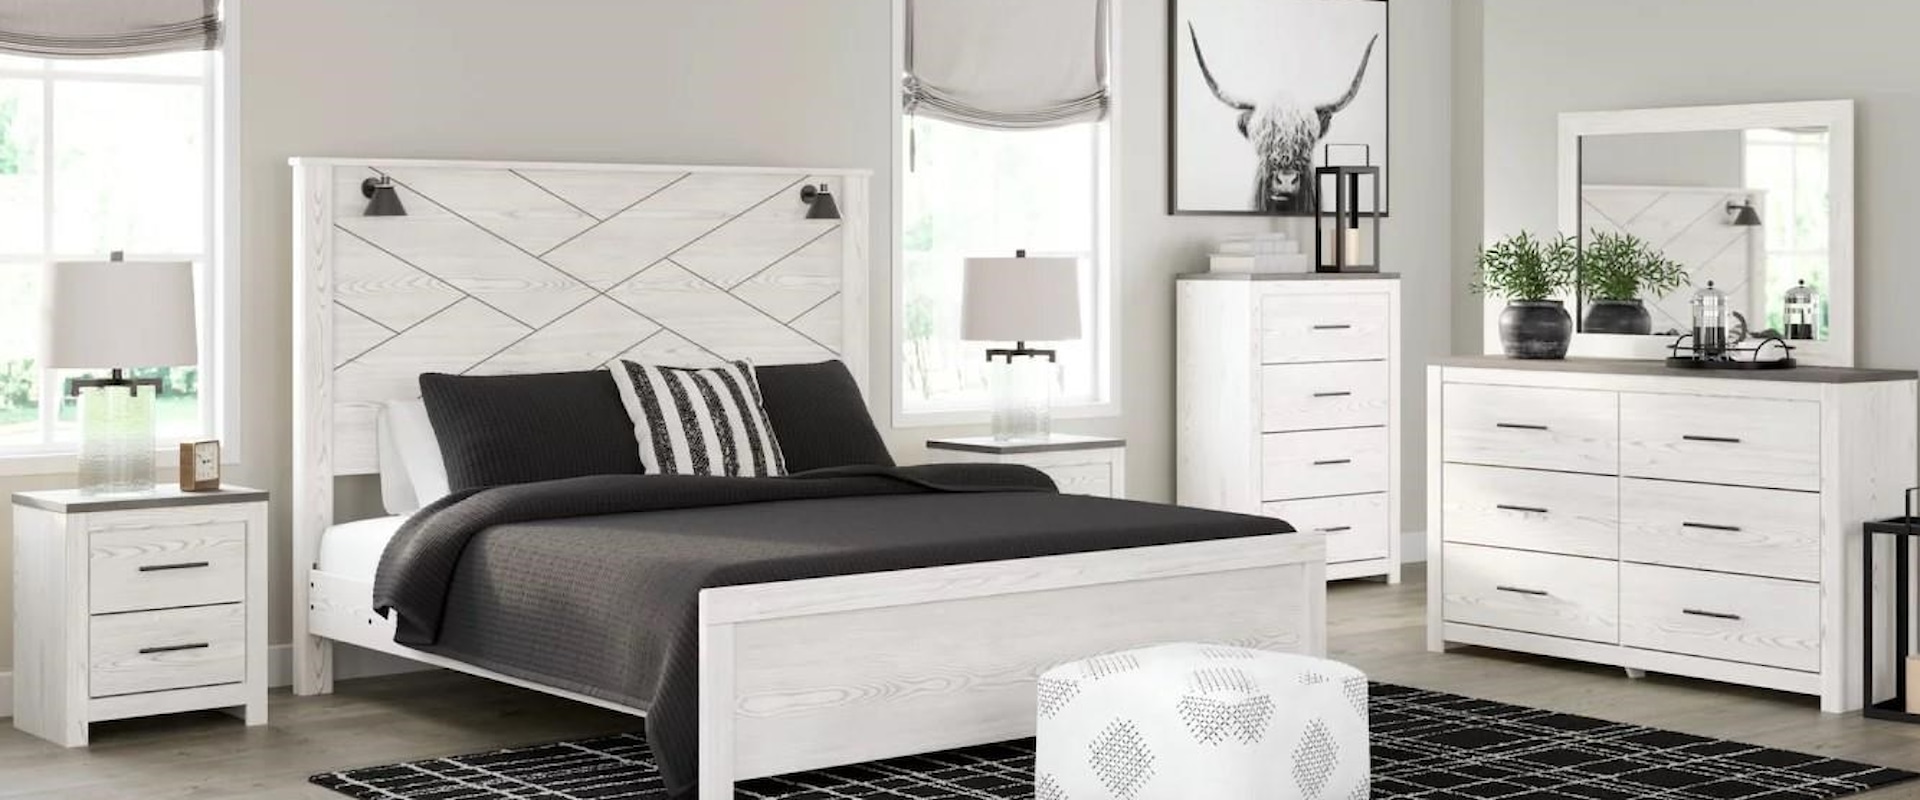 3 Piece King Panel Bed with Headboard Lights, 6 Drawer Dresser, and 2 Drawer Nightstand Set